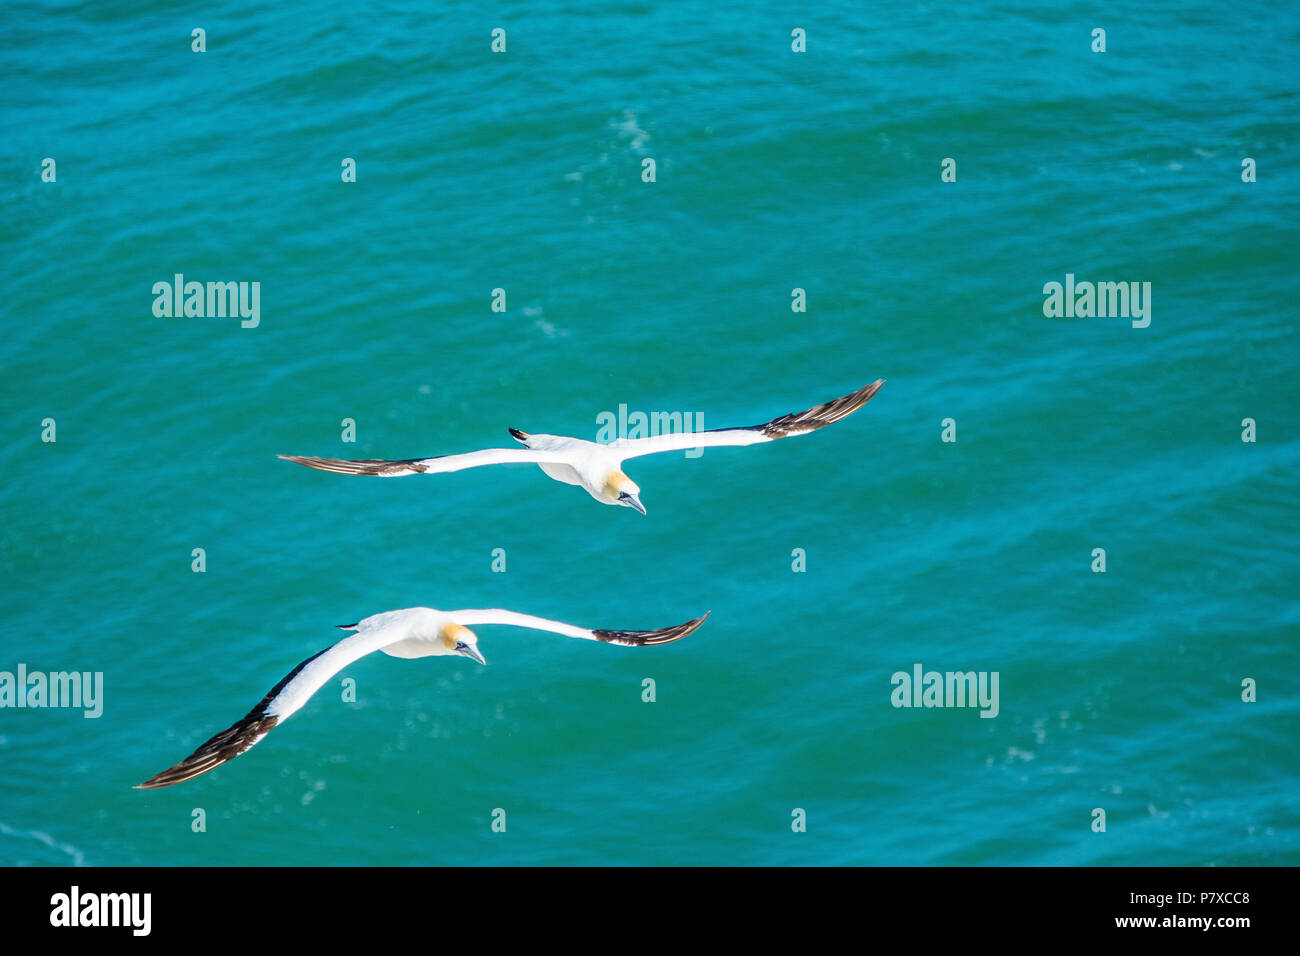 Pair of gannets fly over ocean searching for food Stock Photo